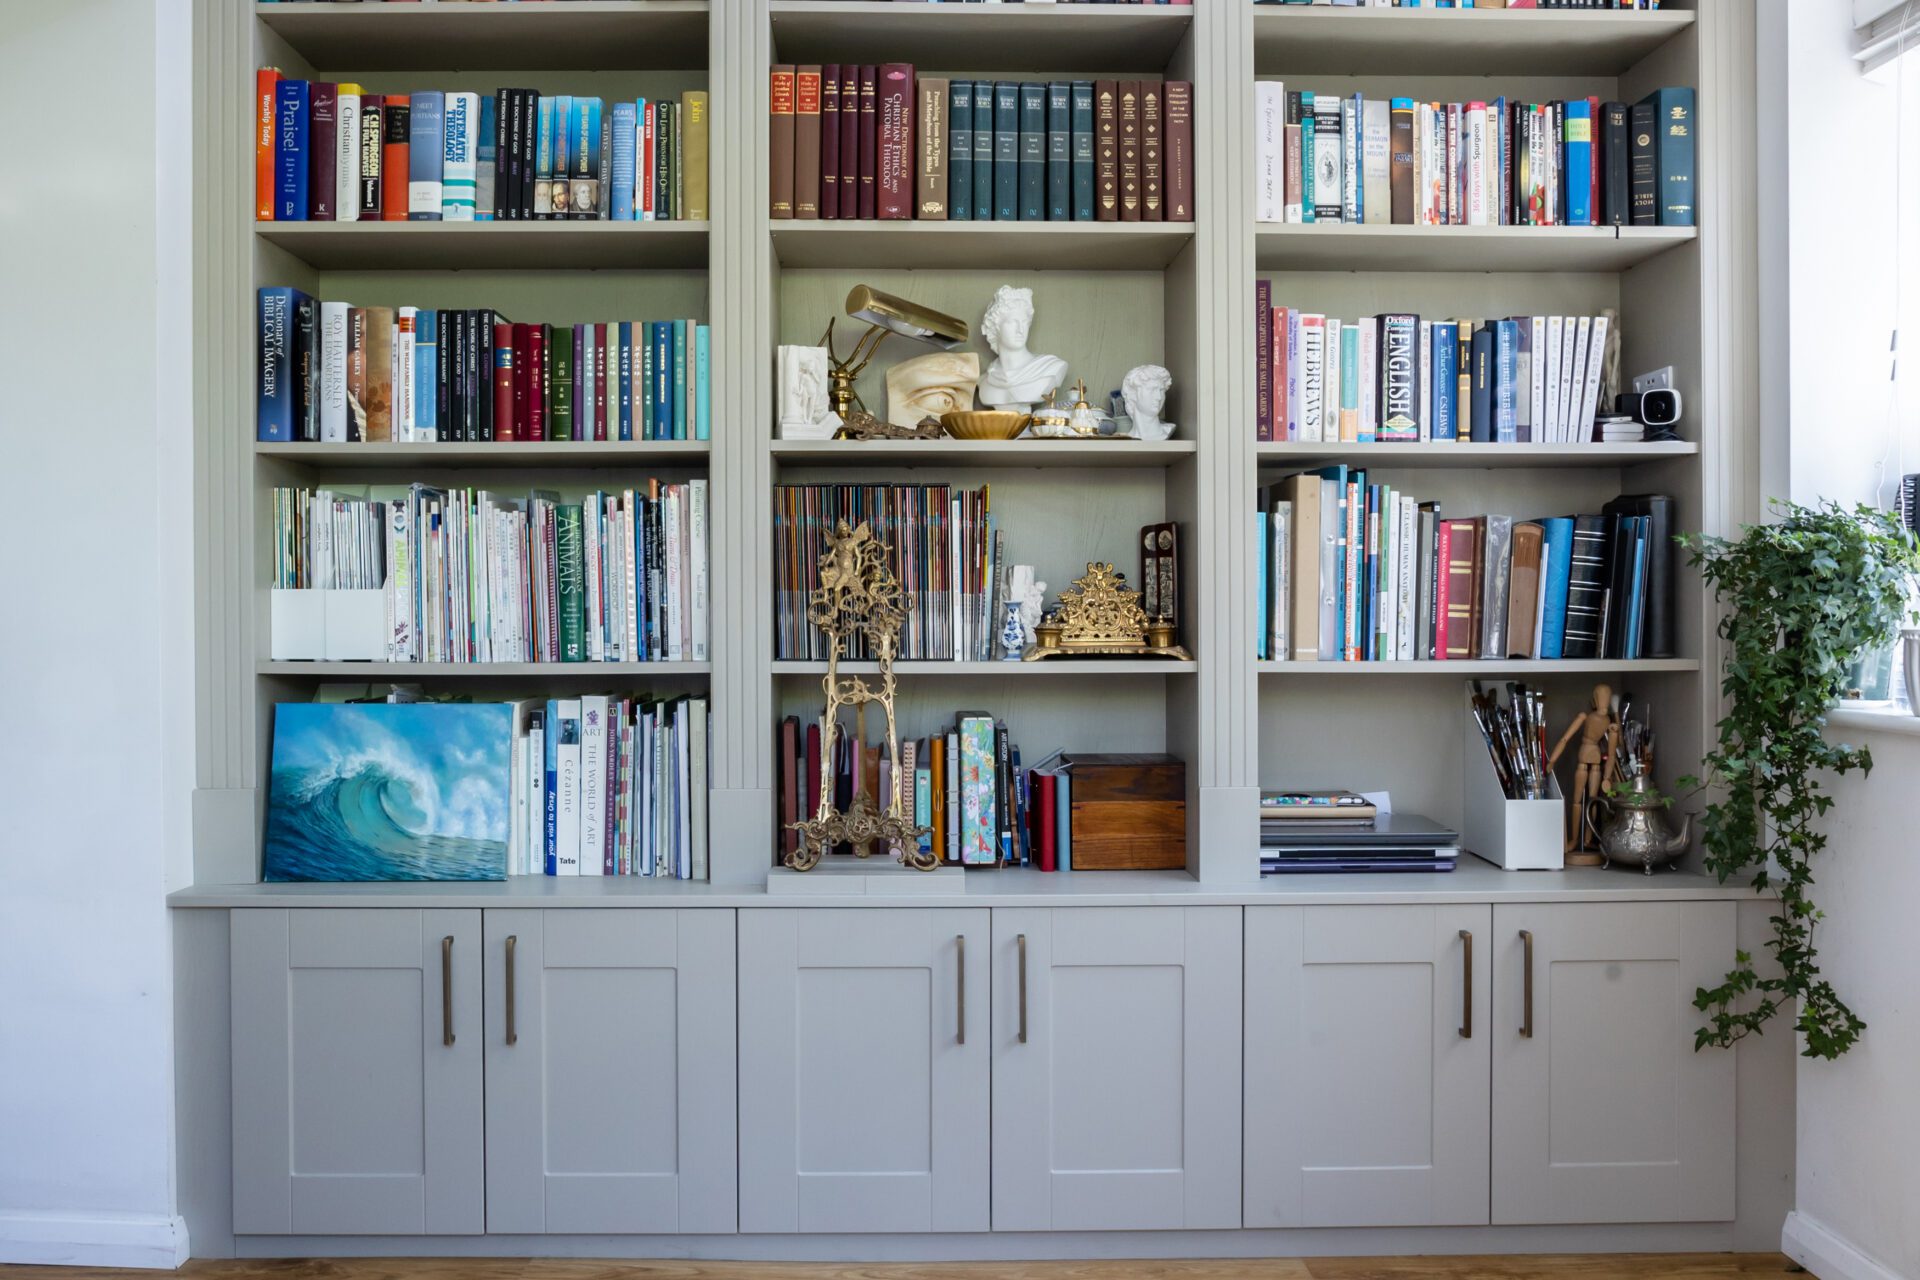 Image of a bespoke fitted shelving unit